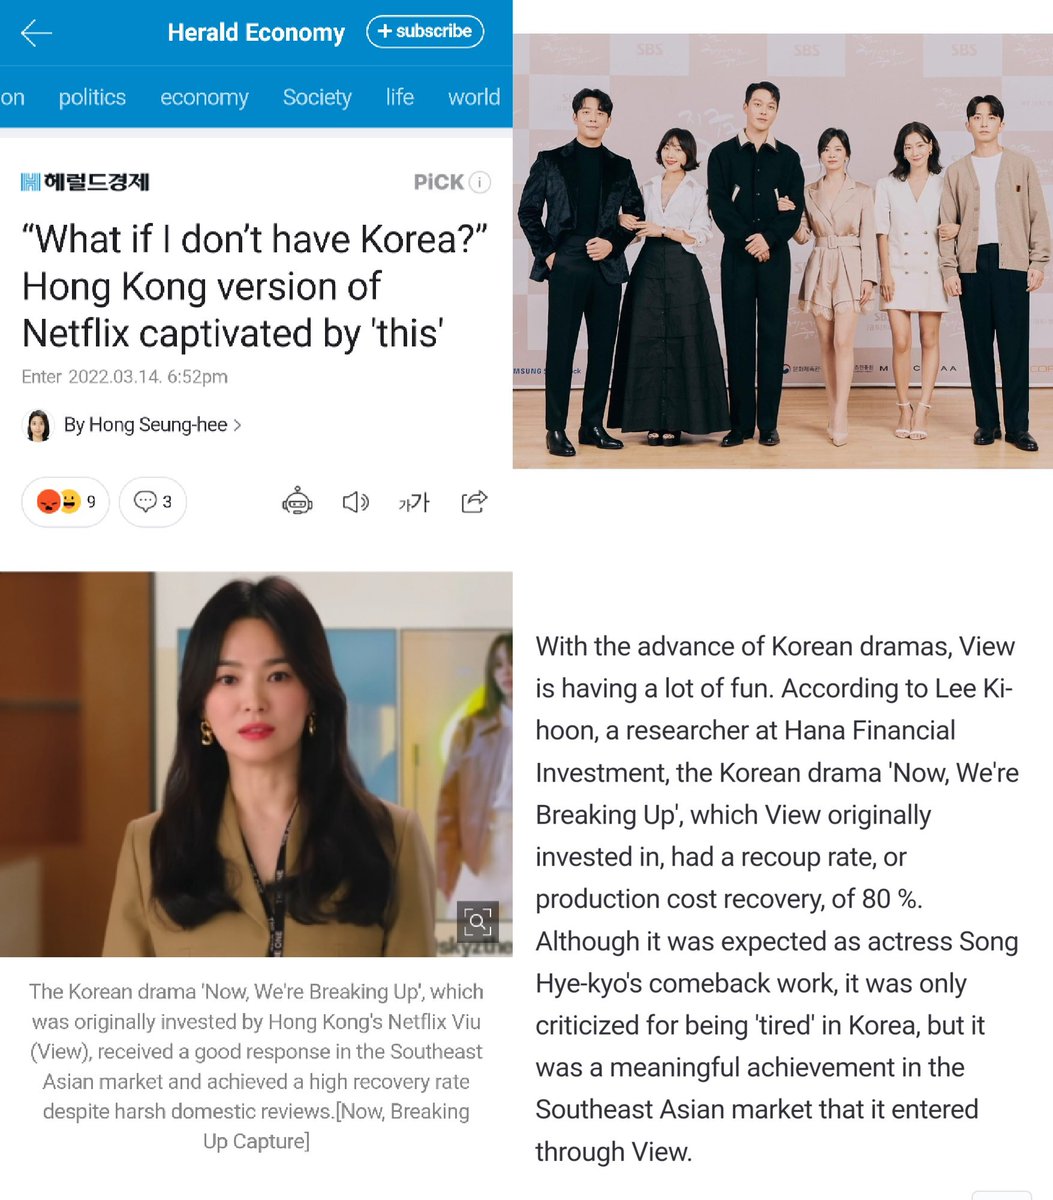 It was only criticized for being 'tired' in Korea, but it was a meaningful achievement in the Southeast Asian market that it entered through View.🤭🤭🤭

#NowWeAreBreakingUp #SongHyeKyo #jangkiyong #choiheejin #parkhyojoo #kimjoohun #yoonnamoo